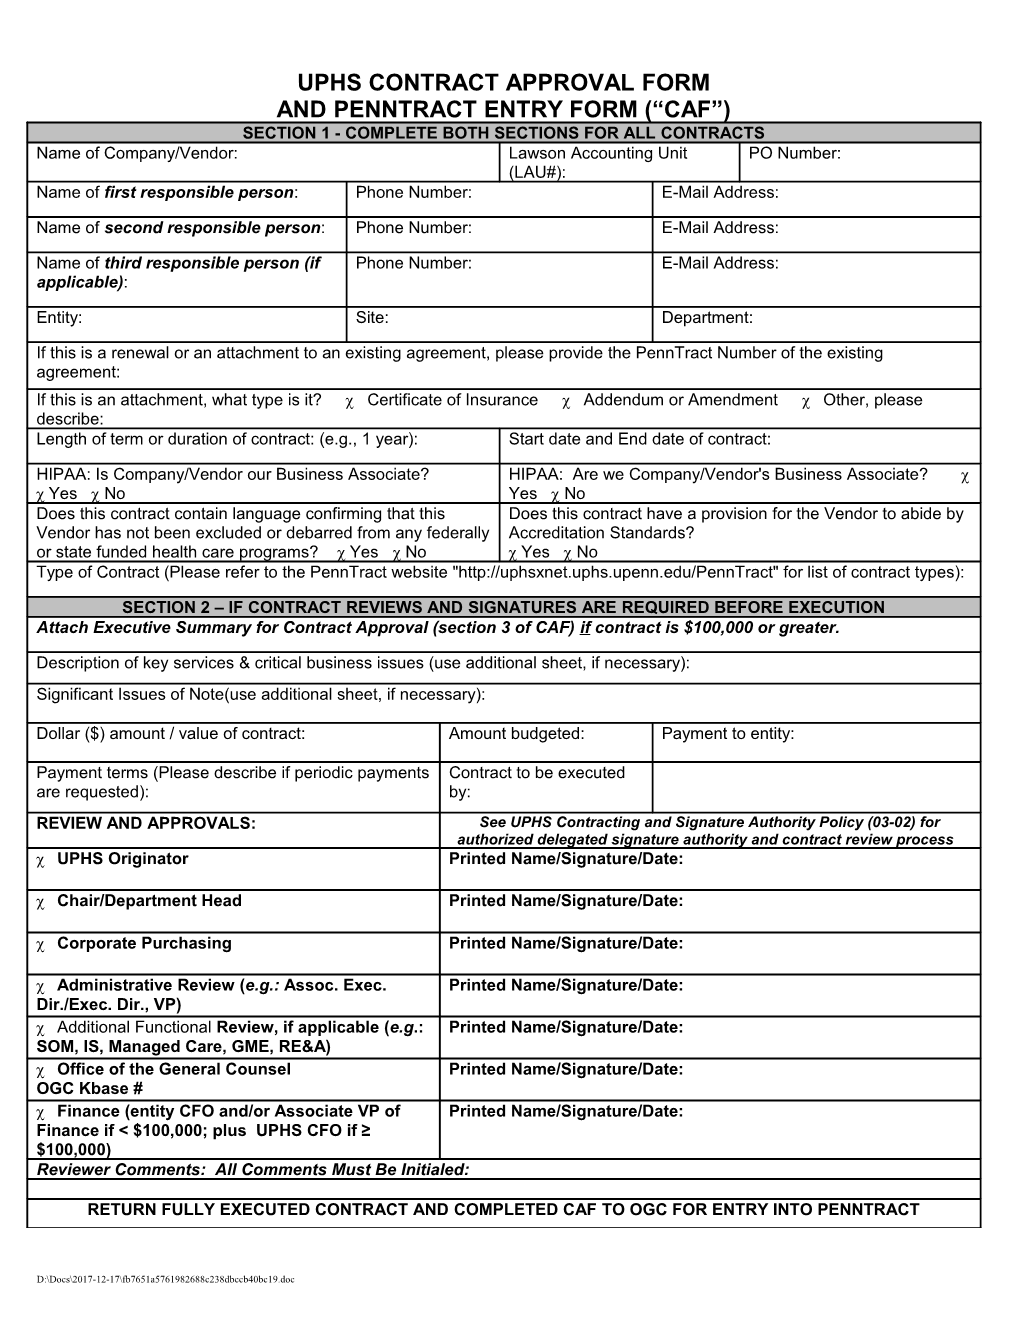 Uphs Contract Approval Form s1